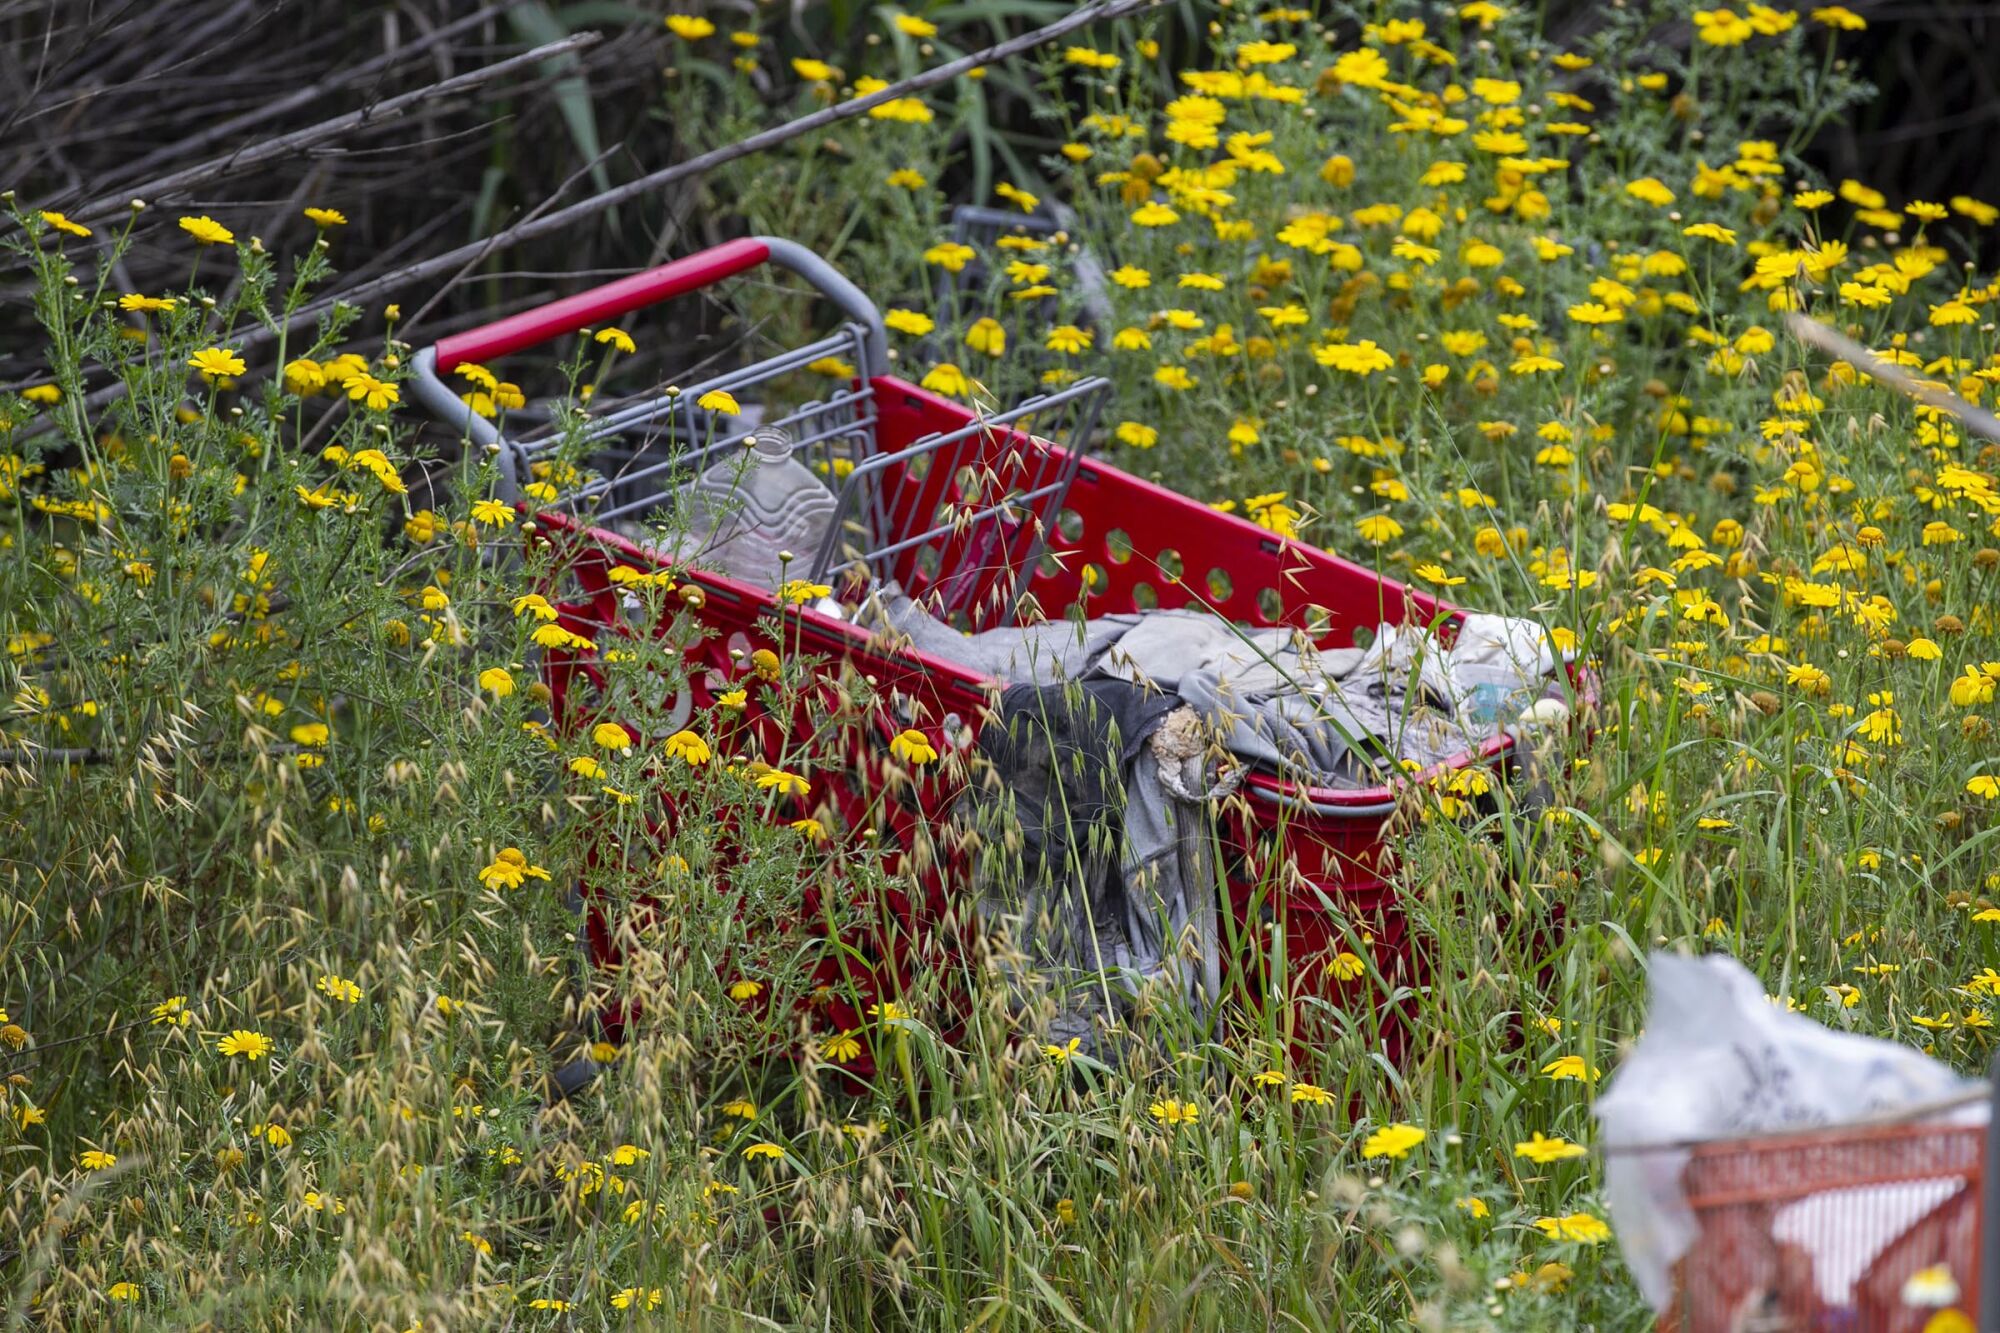 A shopping cart rested amongst growth in the "The Jungle" on Thursday, April 30, 2020.